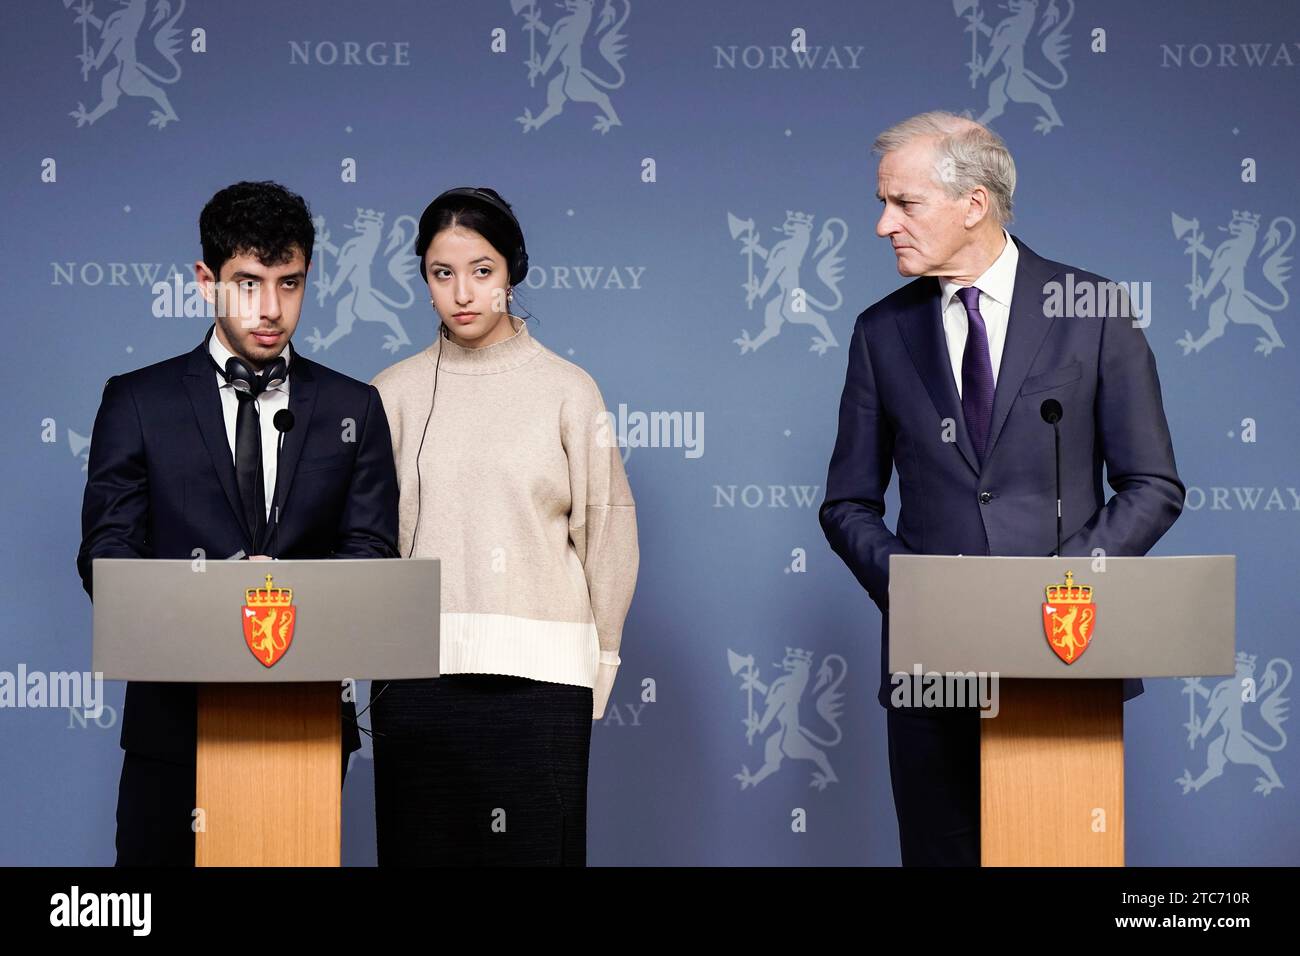 Oslo 20231211.The children of Nobel Prize winner Narges Mohammadi, son Ali Rahmani and daughter Kiana Rahmani, at a press conference with Norway's Prime Minister Jonas Gahr Stoere after the family of the Peace Prize winner met the Prime Minister in the Prime Minister's residence on Monday morning. Photo: Cornelius Poppe / NTB Stock Photo